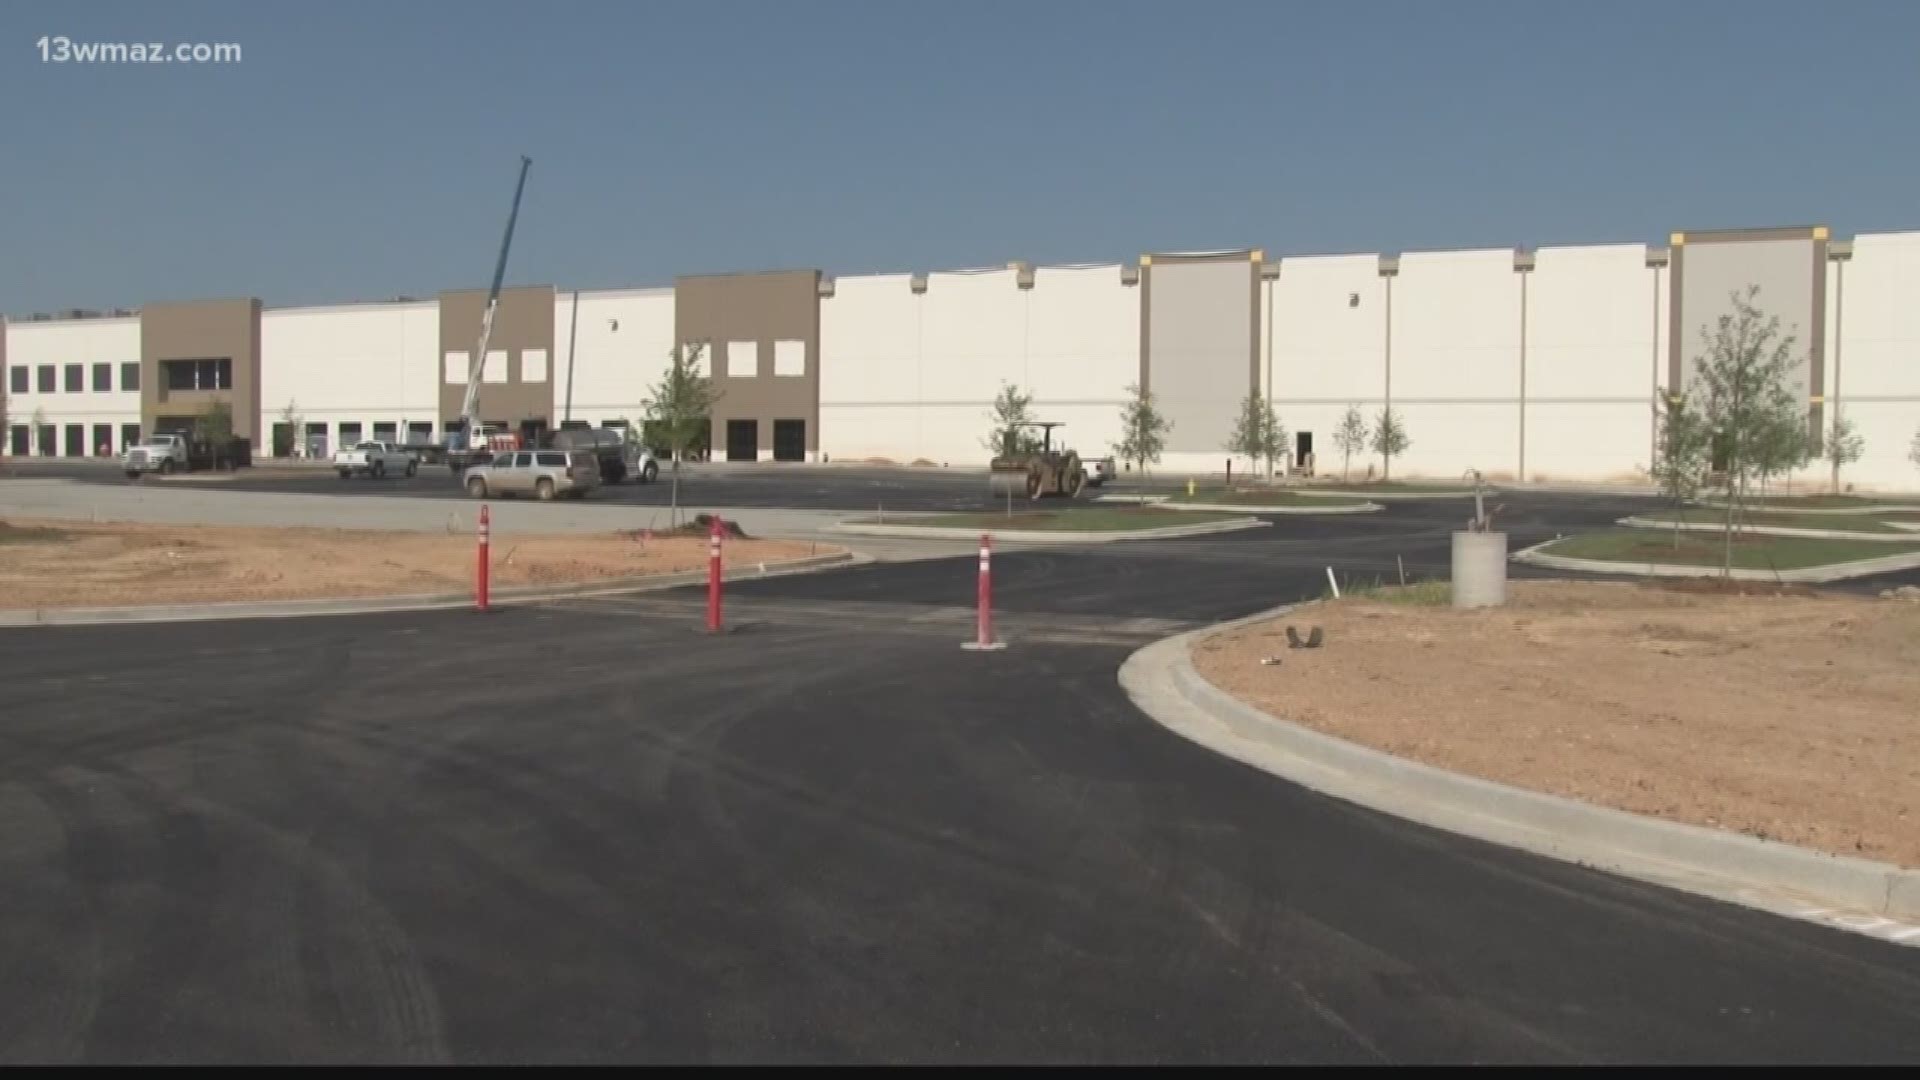 Macon-Bibb's Industrial Authority says Amazon's distribution center in Macon plans to hire 30 employees by the end of July and hundreds more after that.